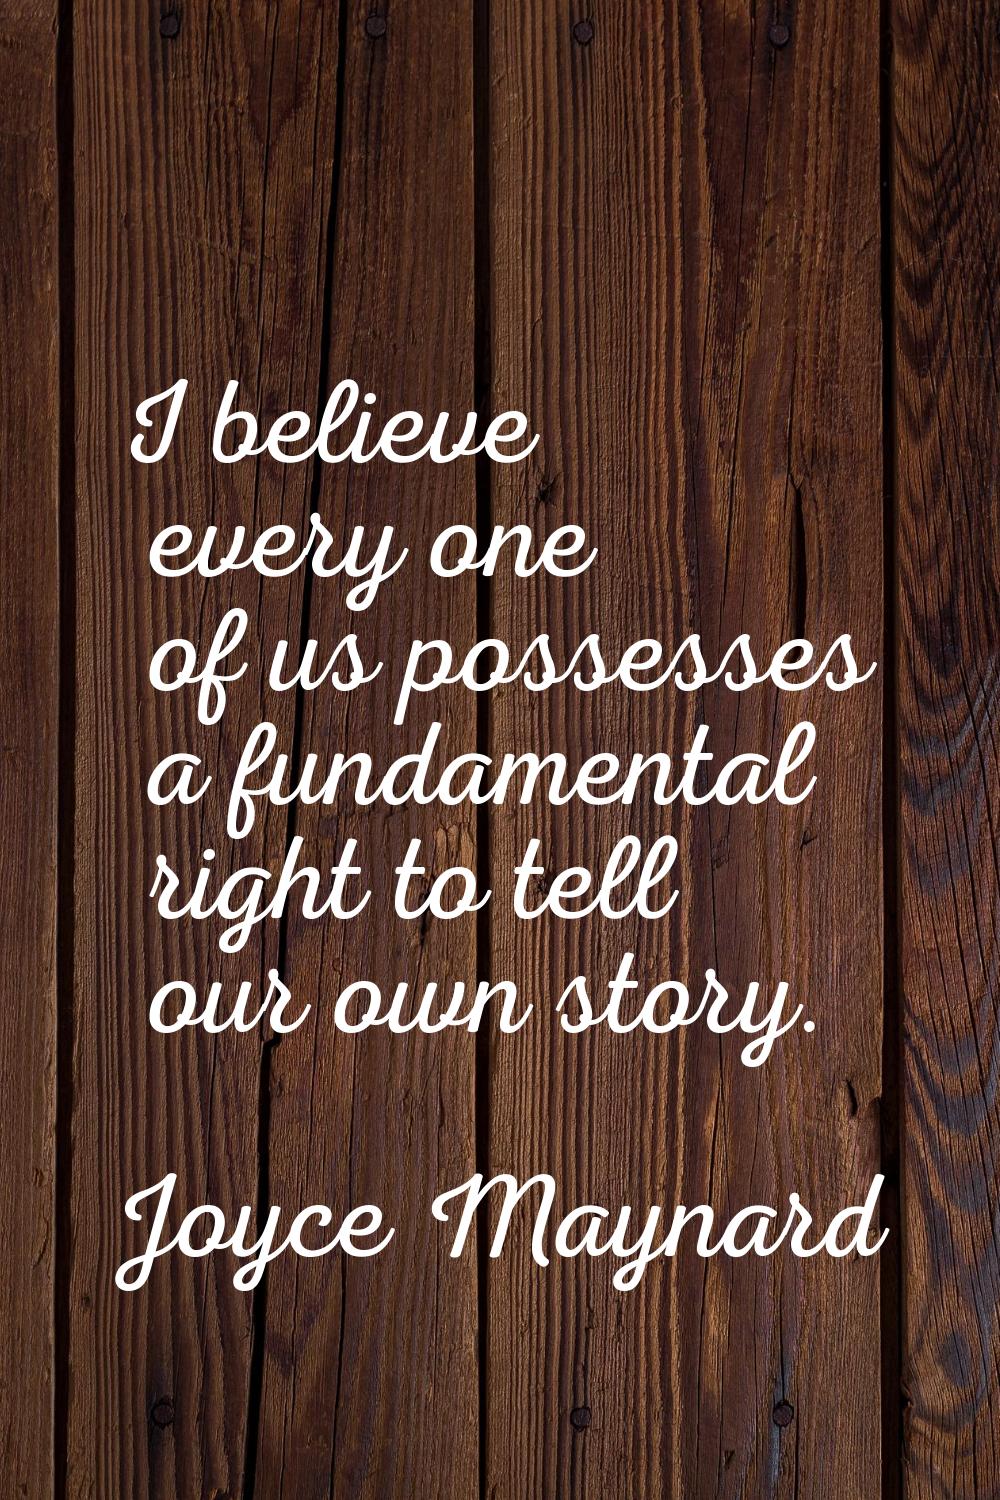 I believe every one of us possesses a fundamental right to tell our own story.